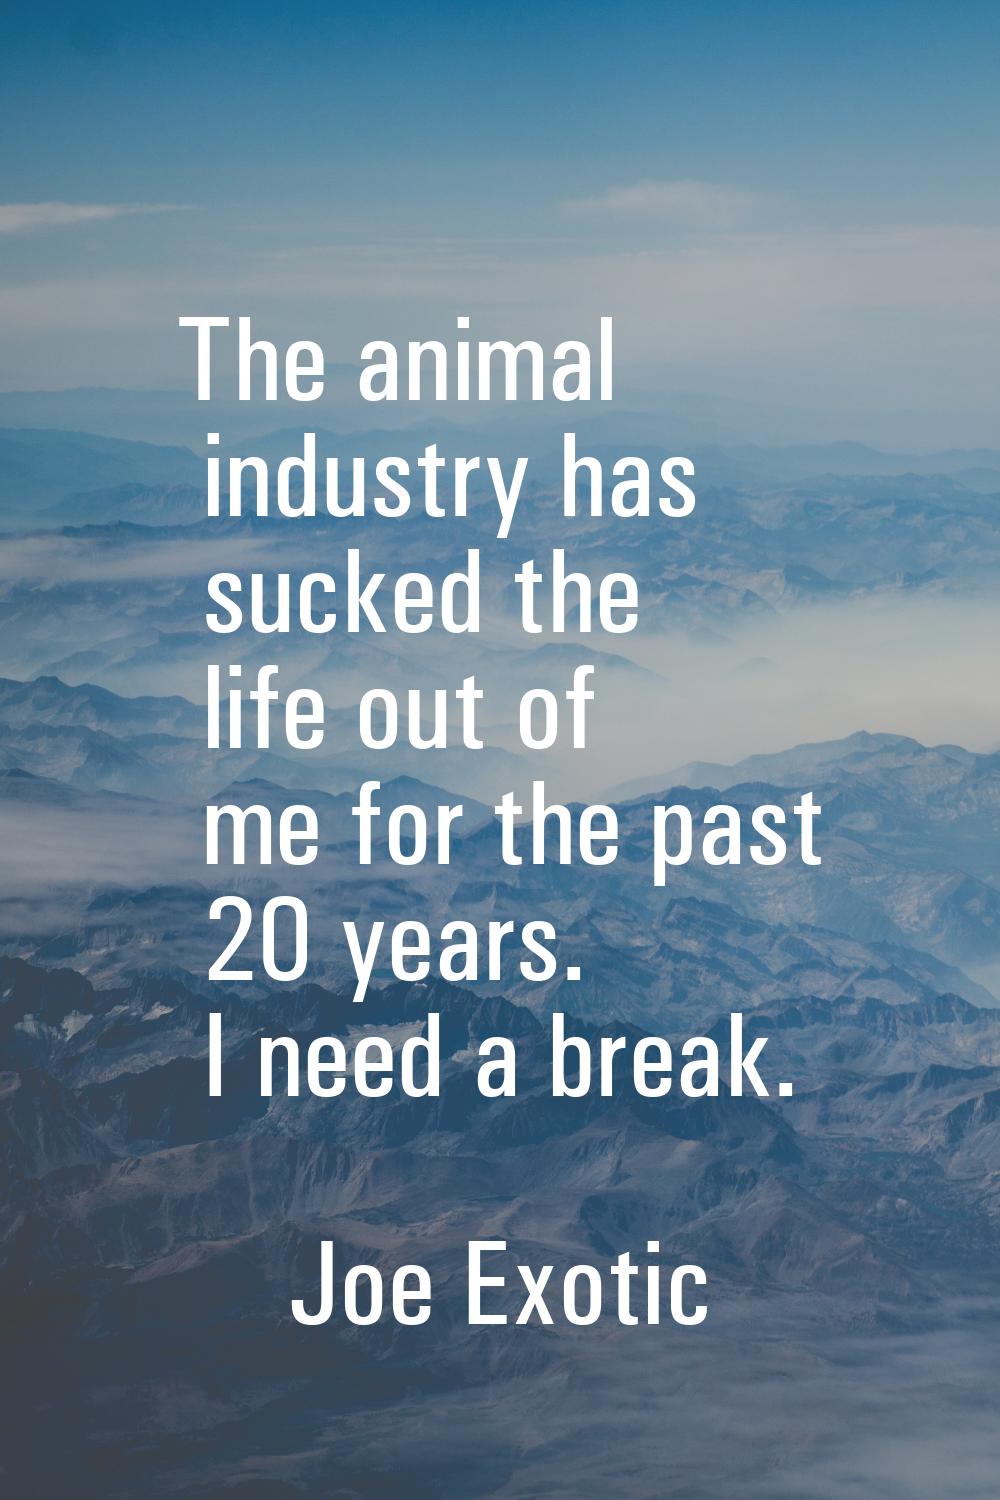 The animal industry has sucked the life out of me for the past 20 years. I need a break.